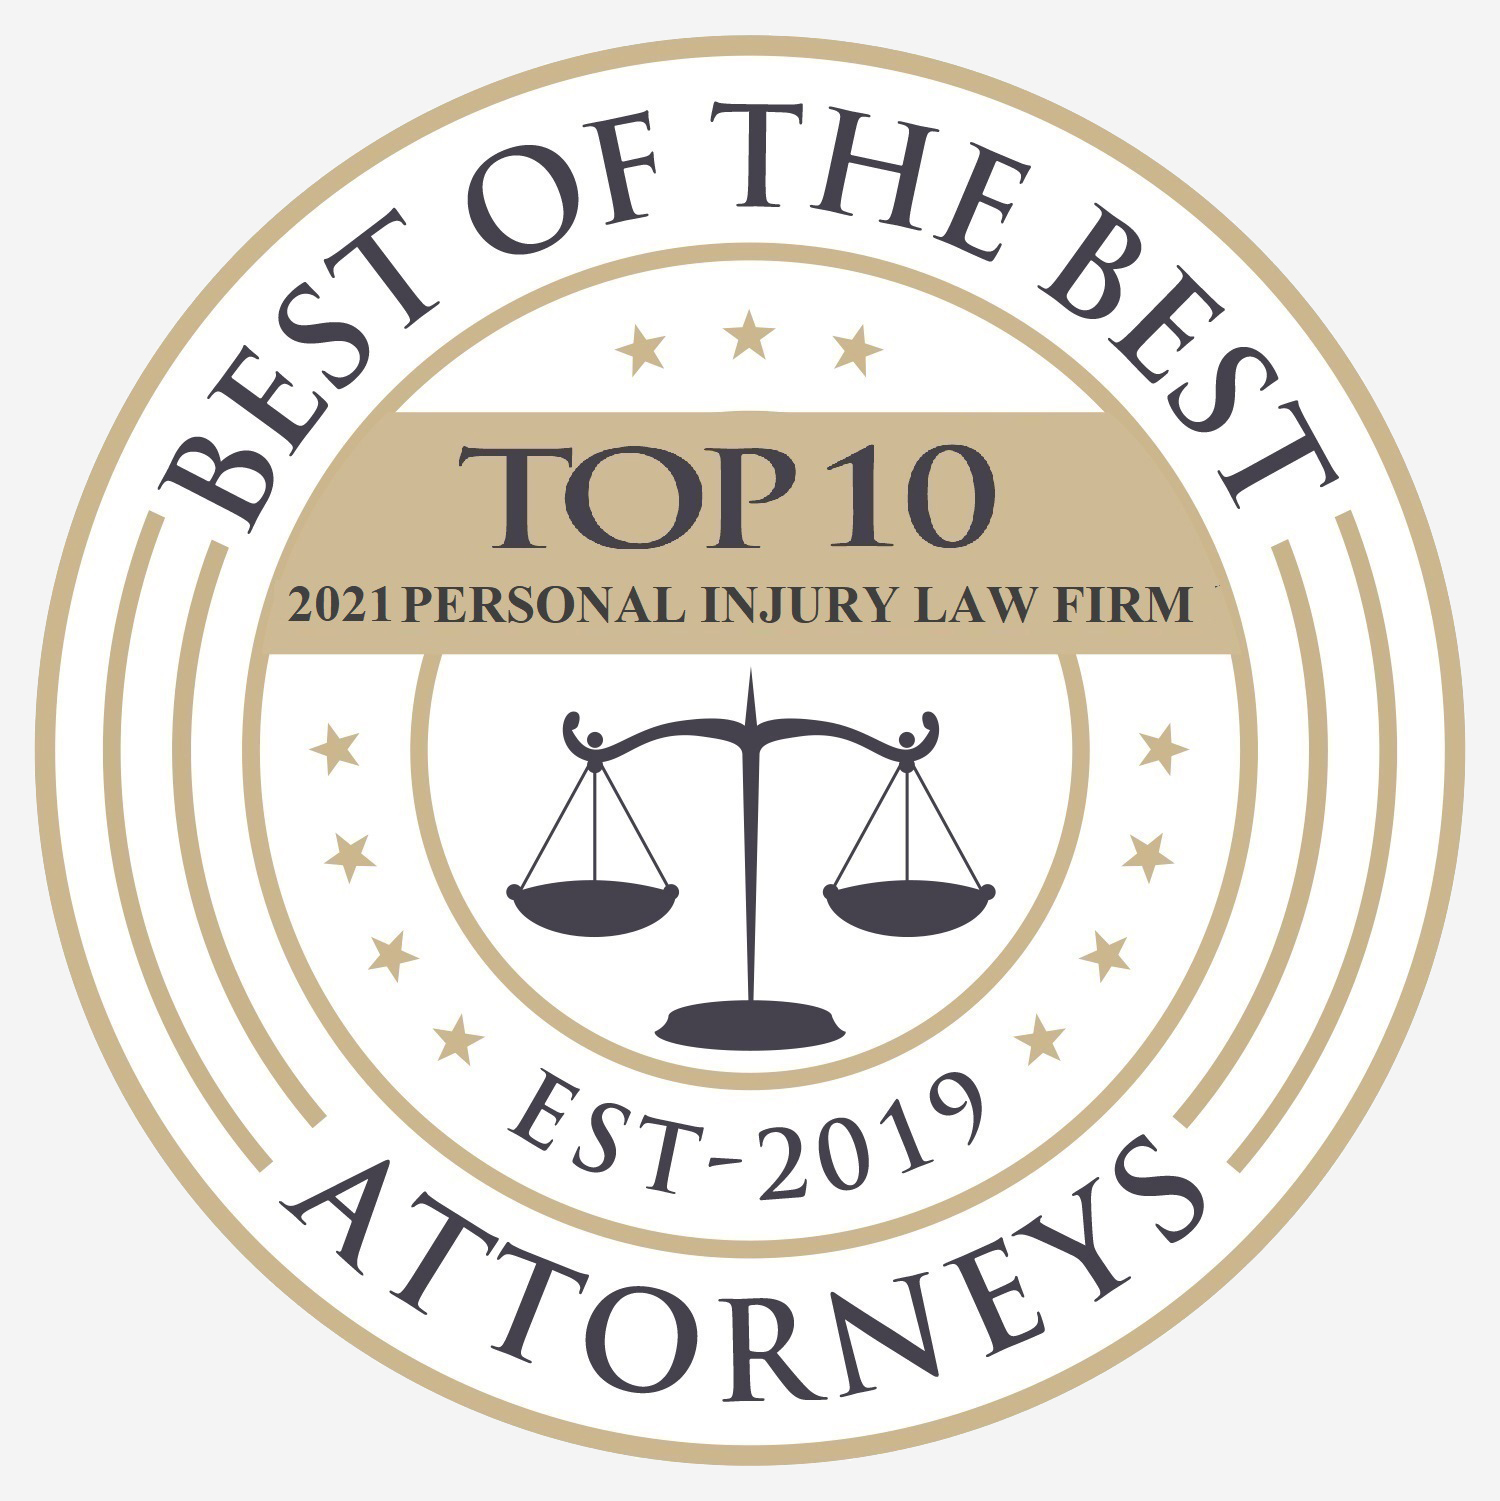 Best of the Best Attorneys - Top 10 Personal Injury Law Firm 2021